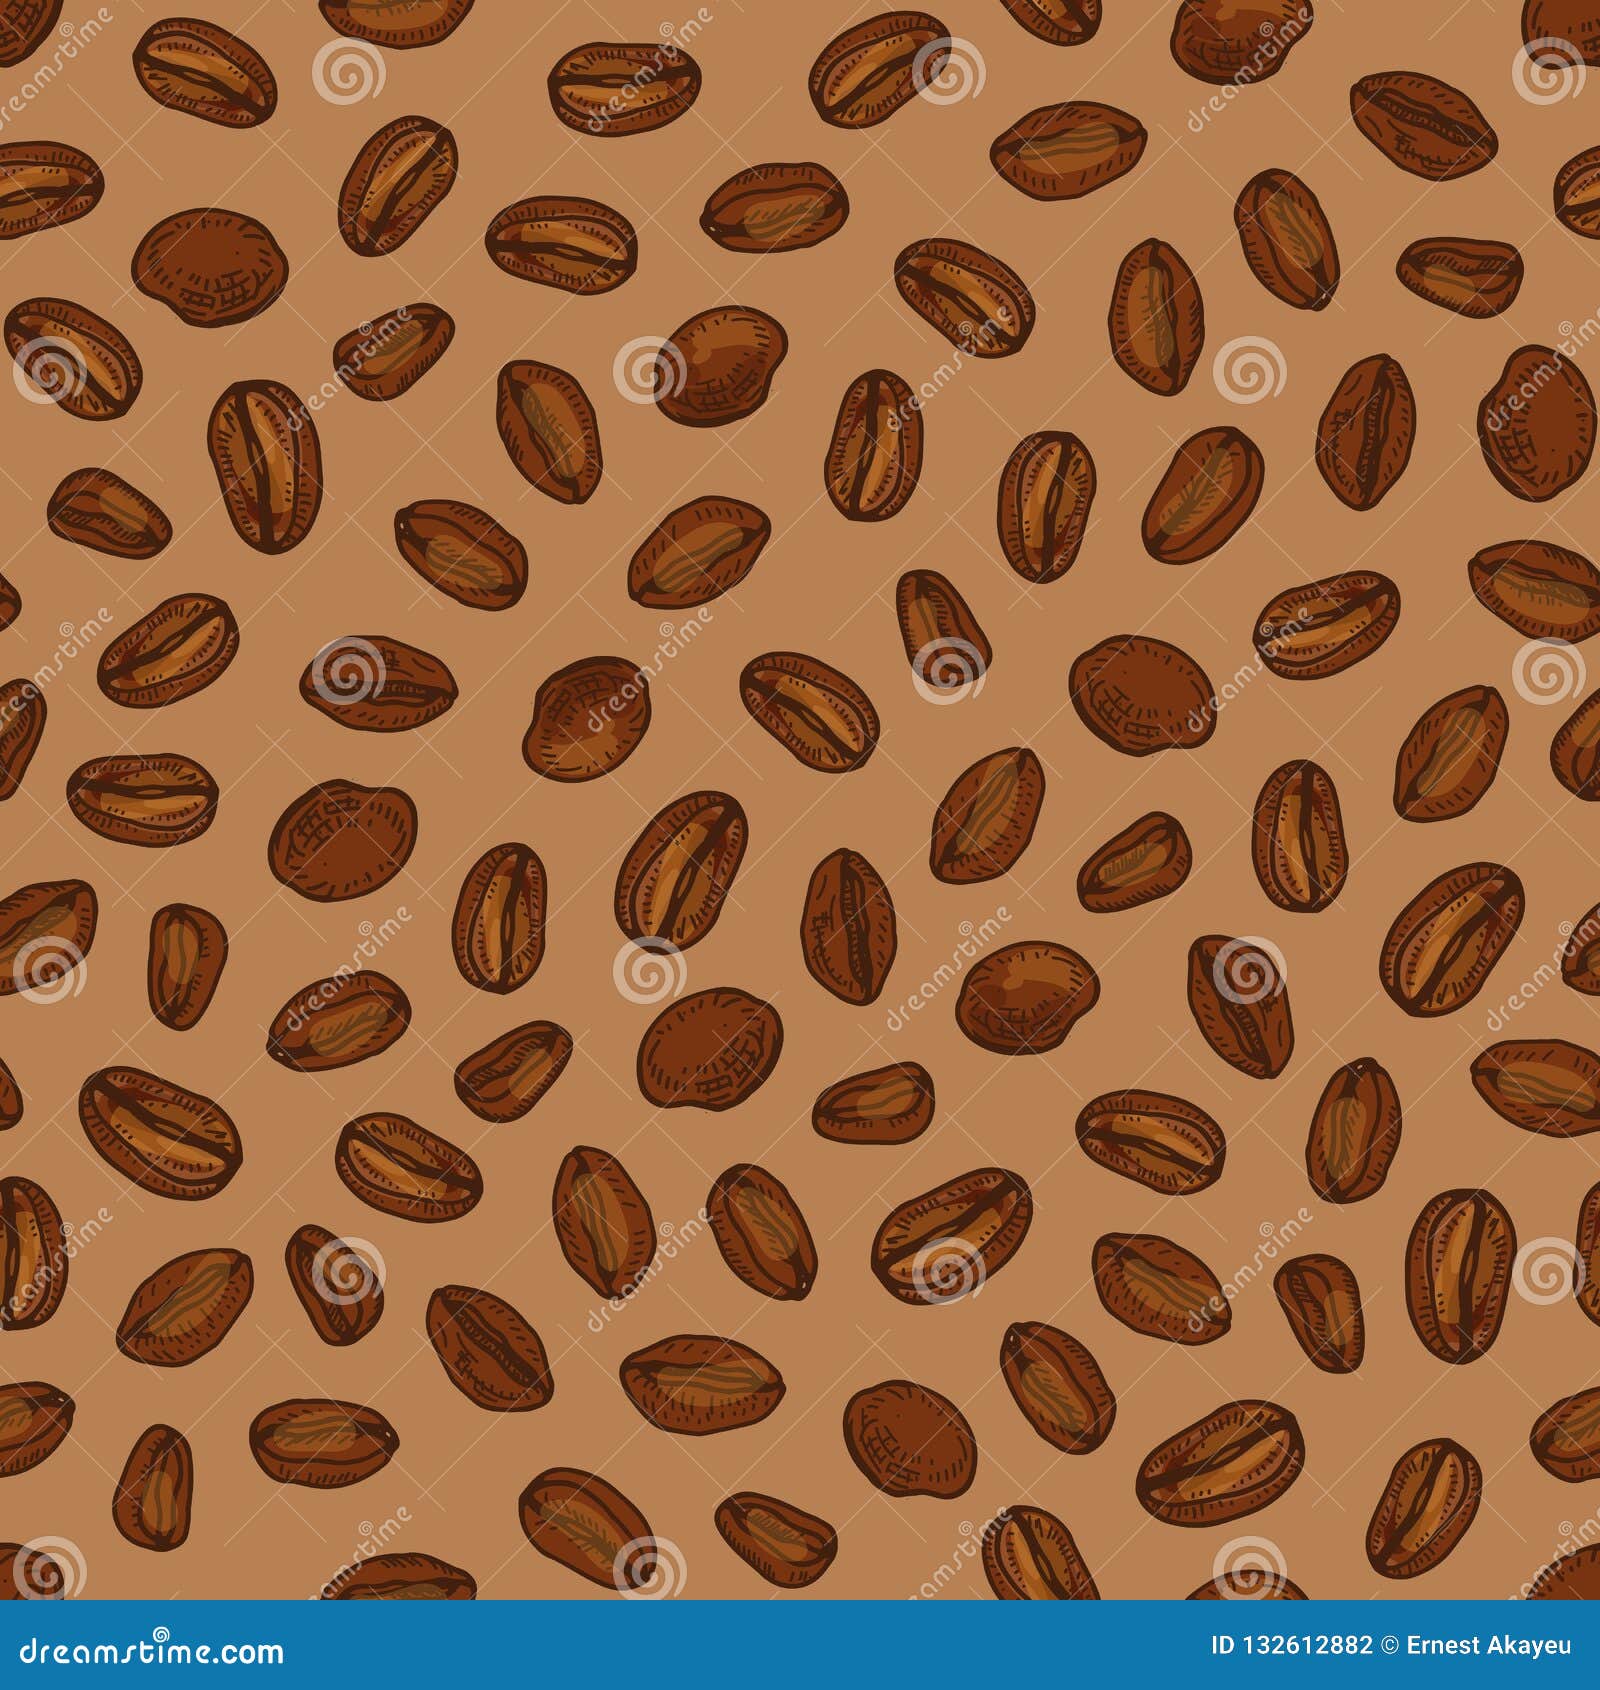 elegant seamless pattern with roasted coffee seeds or beans scattered on brown background. realistic hand drawn 